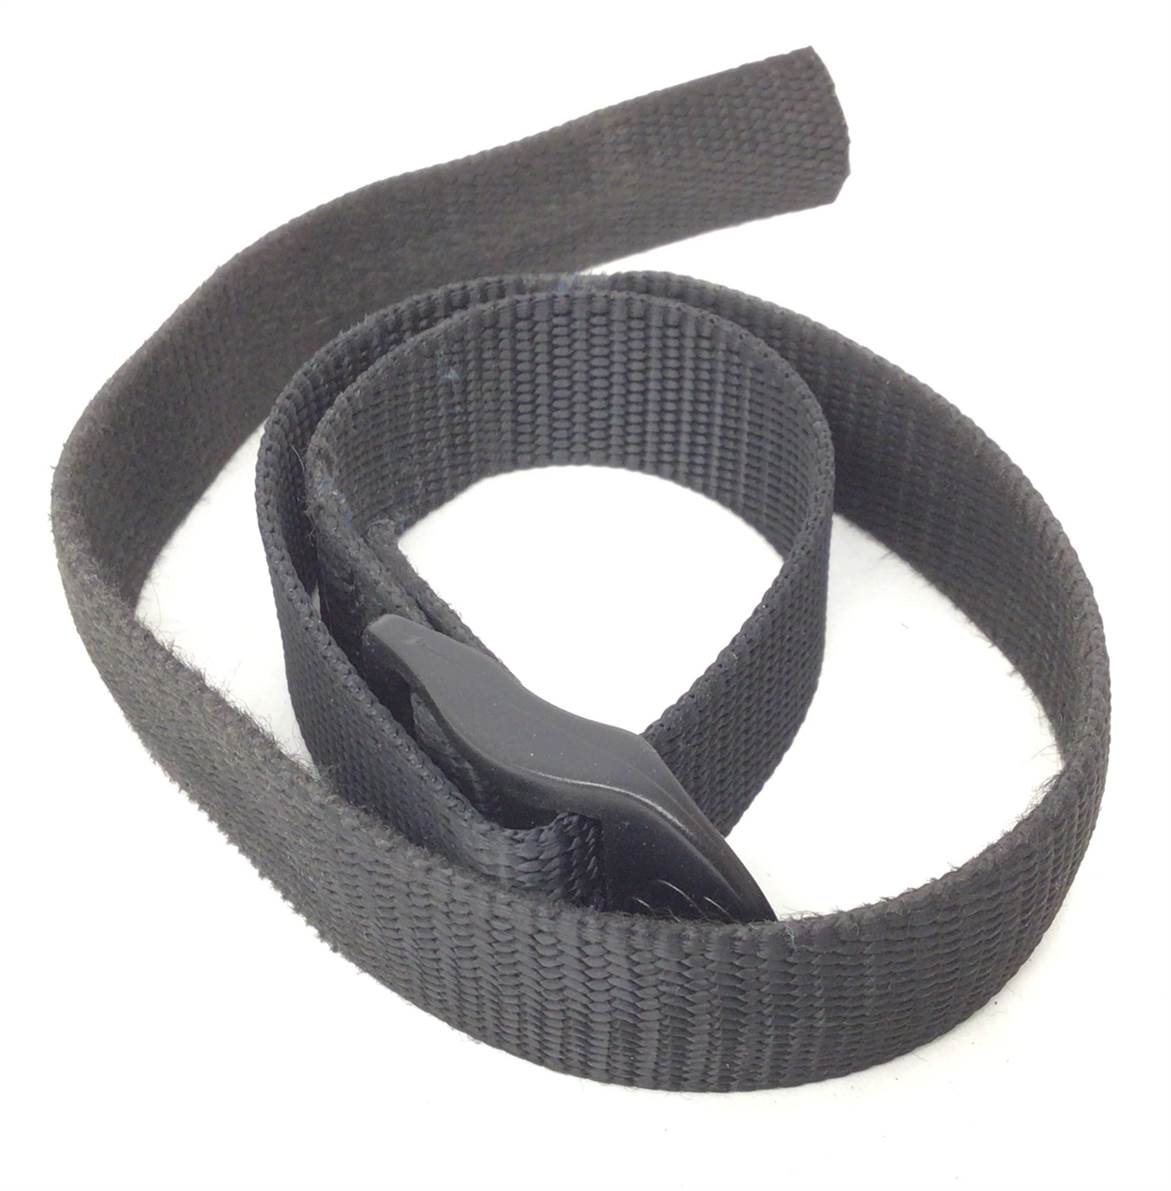 Footstrap with Buckle (Used)